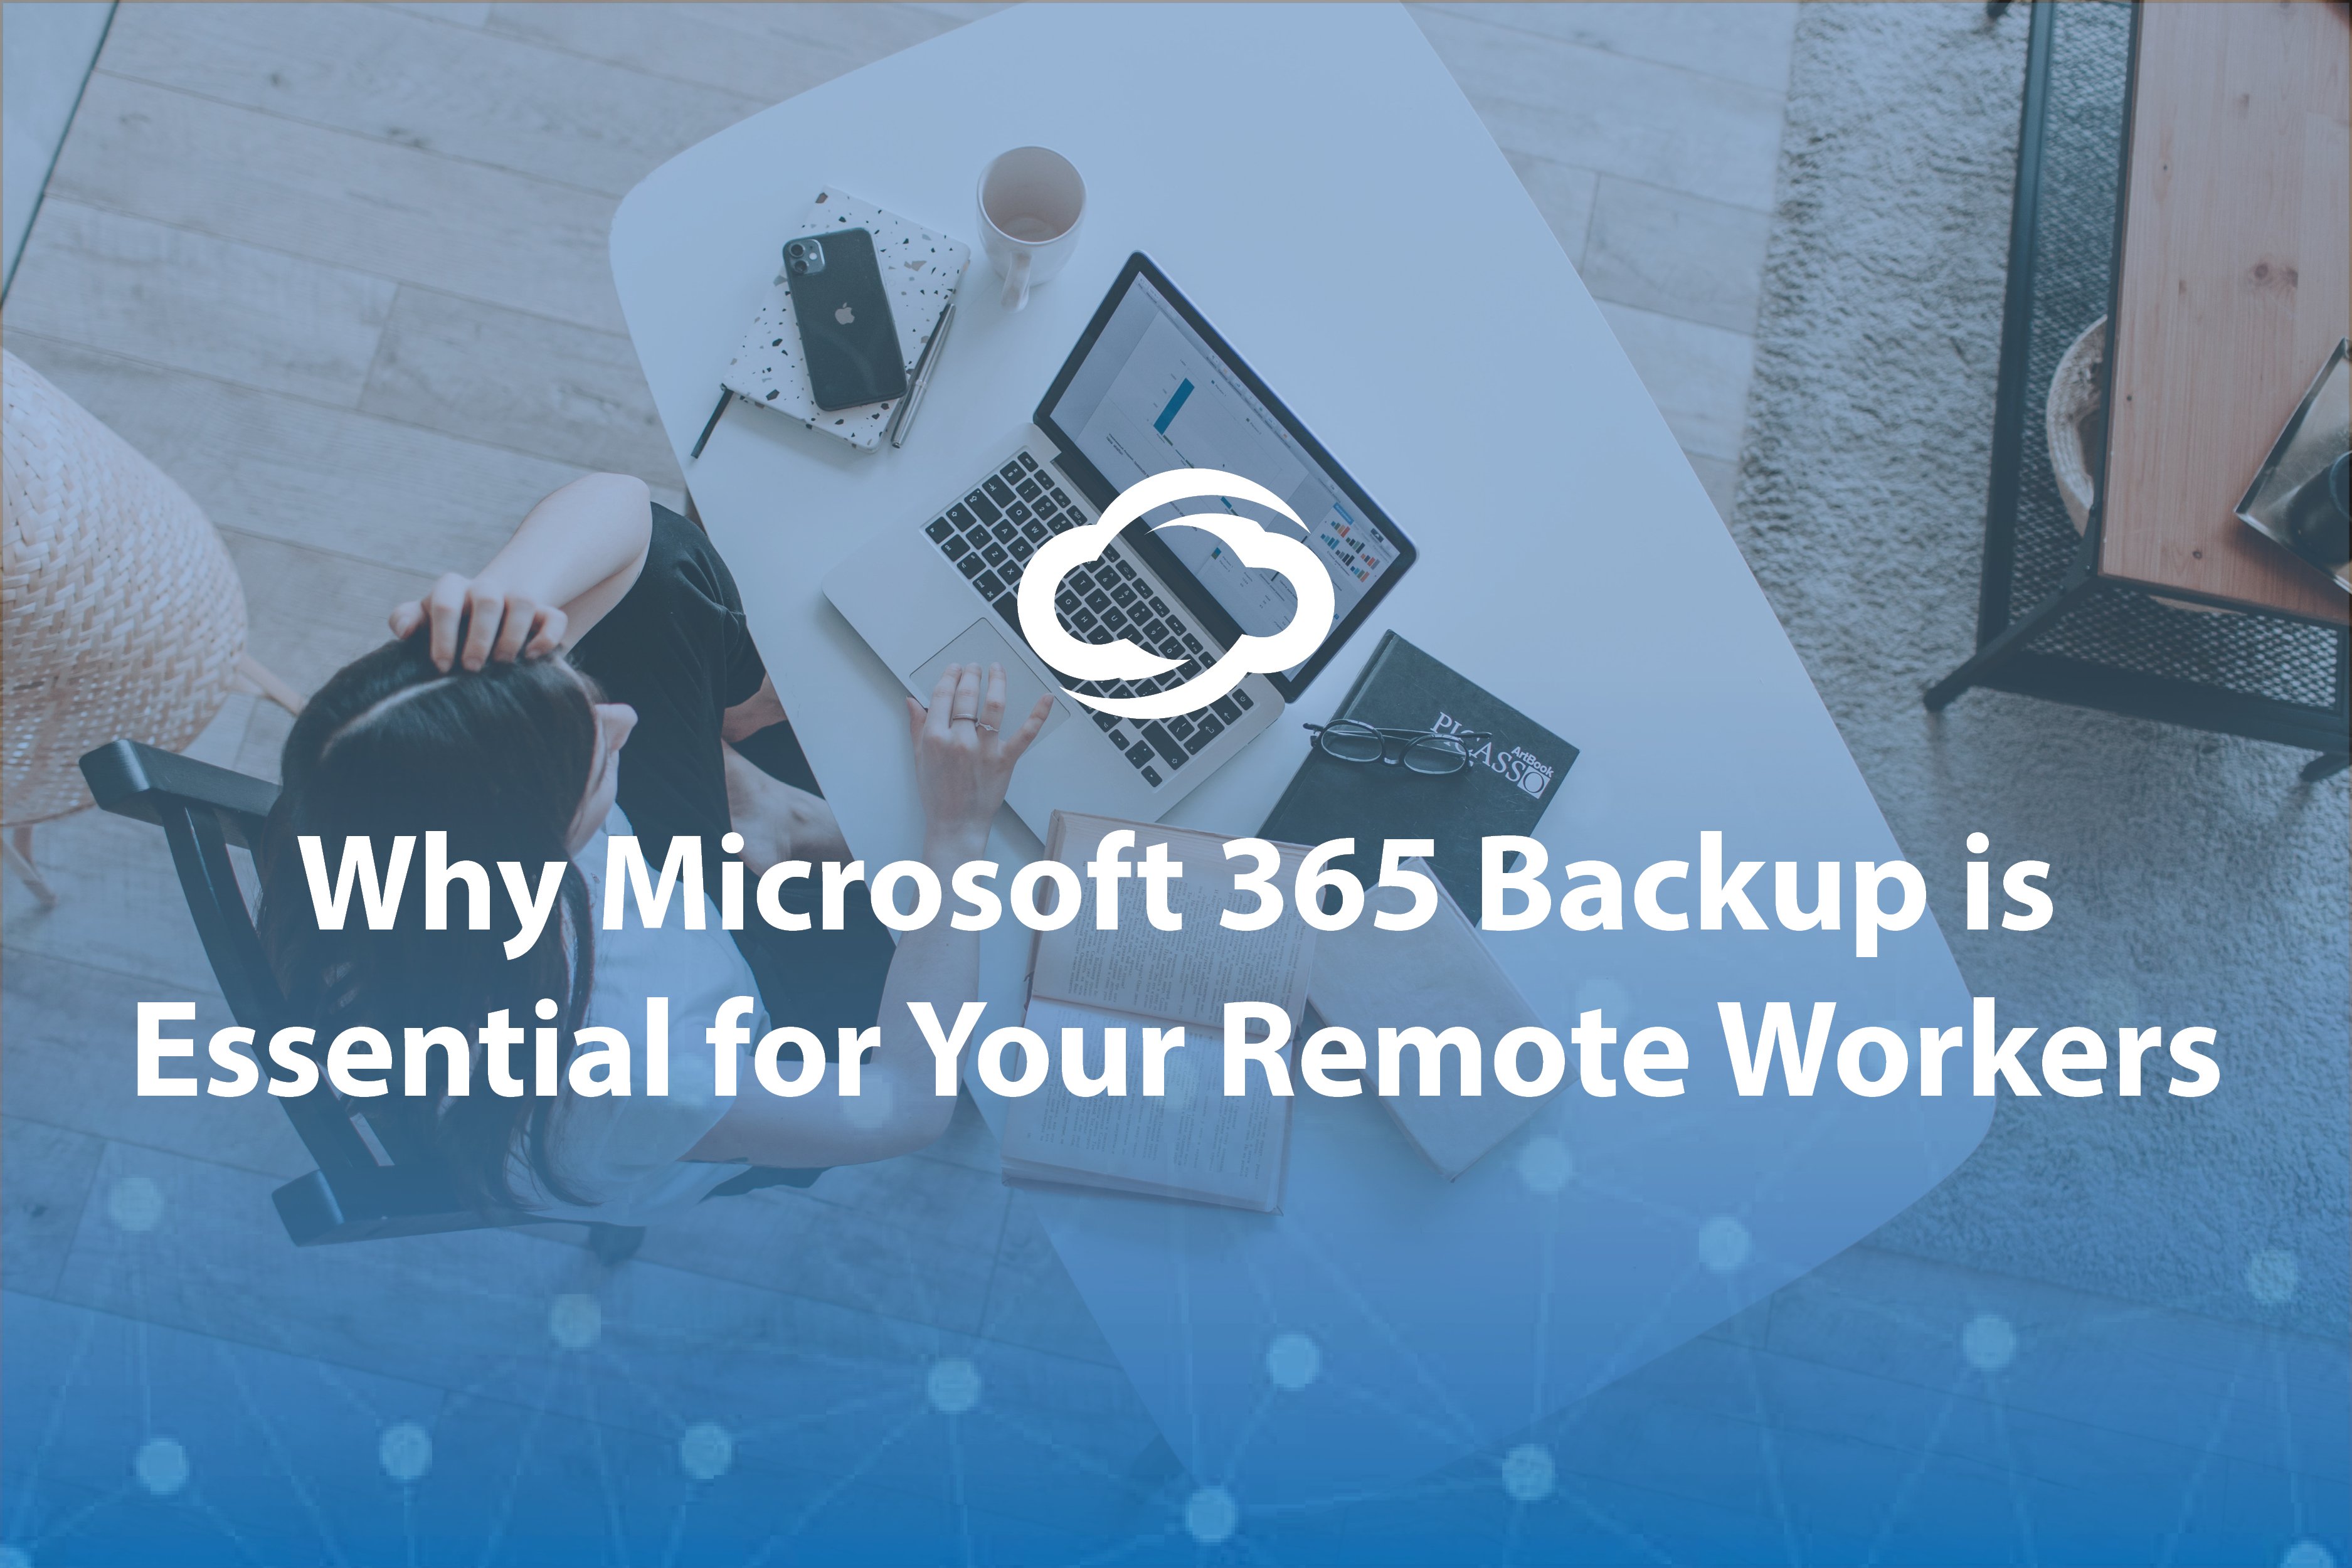 Blog Image - Why Office 365 Backup is Essential for Remote Workers